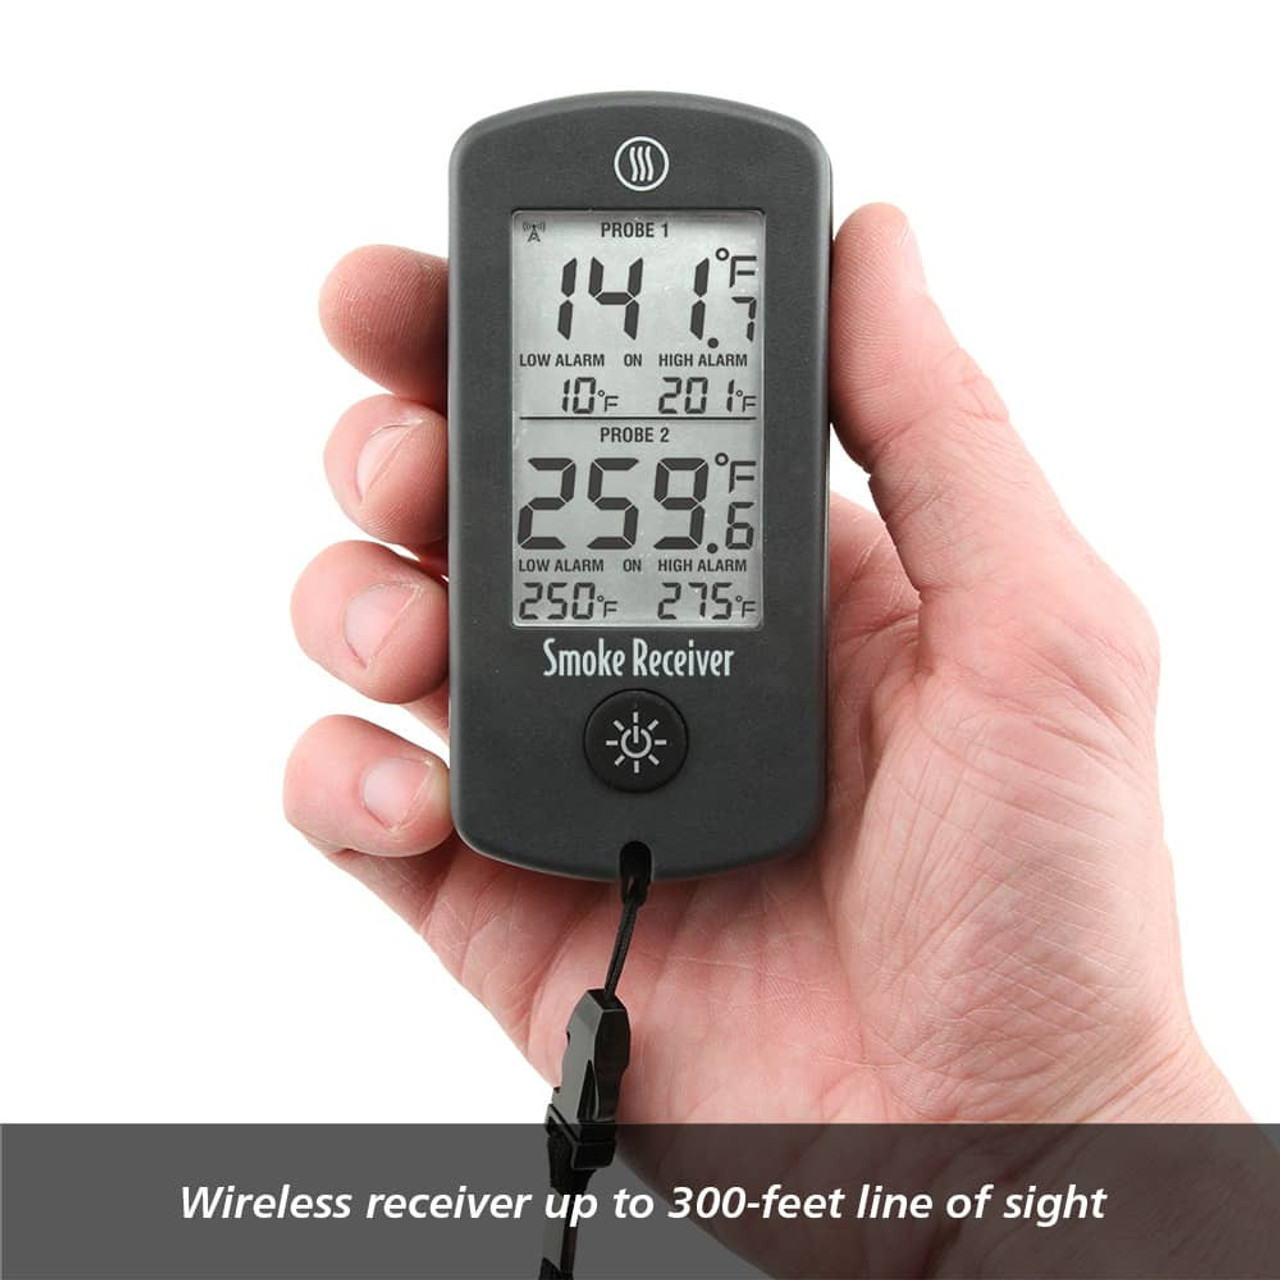 ThermoWorks DOT Bluetooth Thermometer Review Winner - Smoking Meat